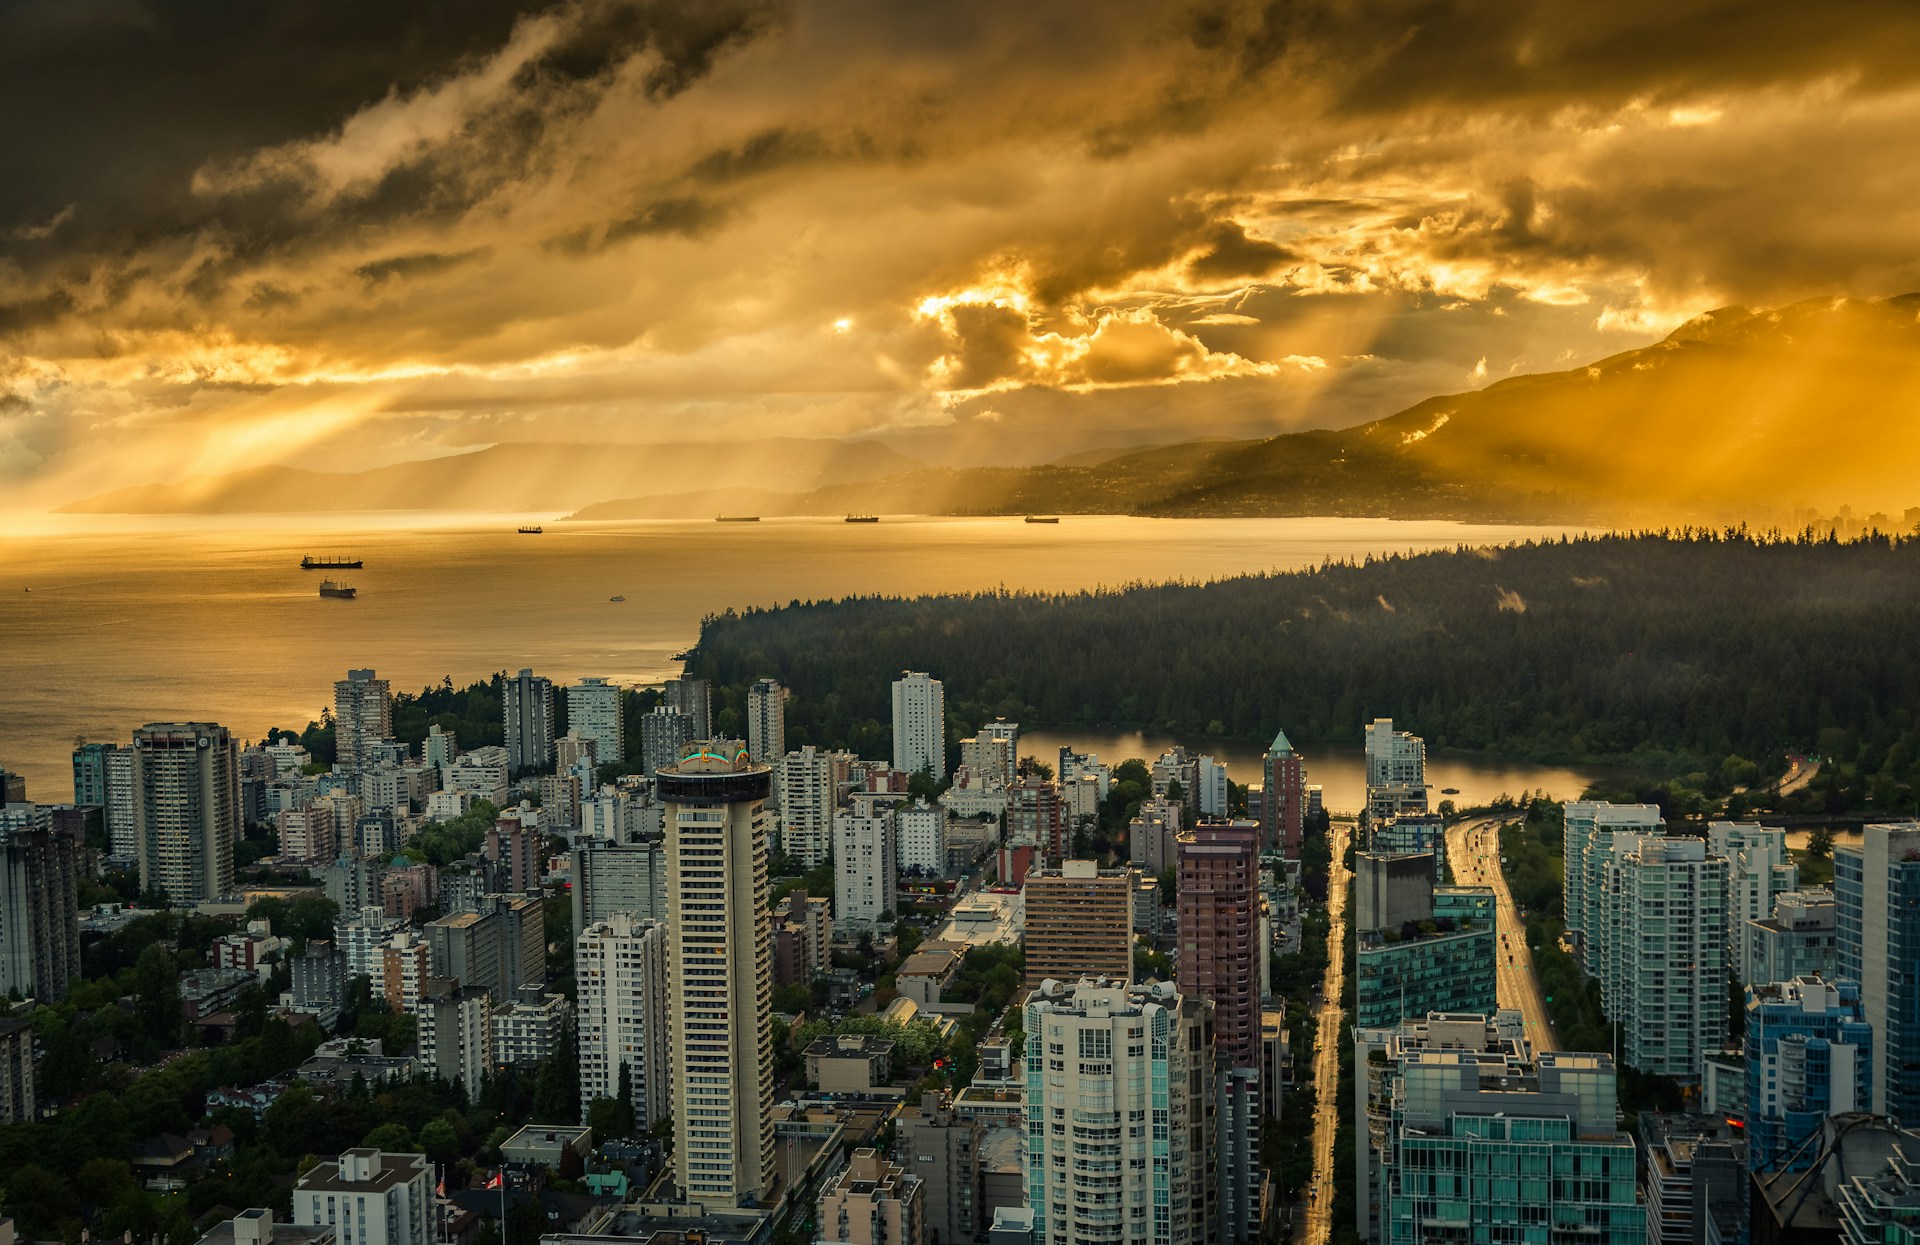 Vancouver photographed from the air at sunset, with rain clouds sweeping across the skyline